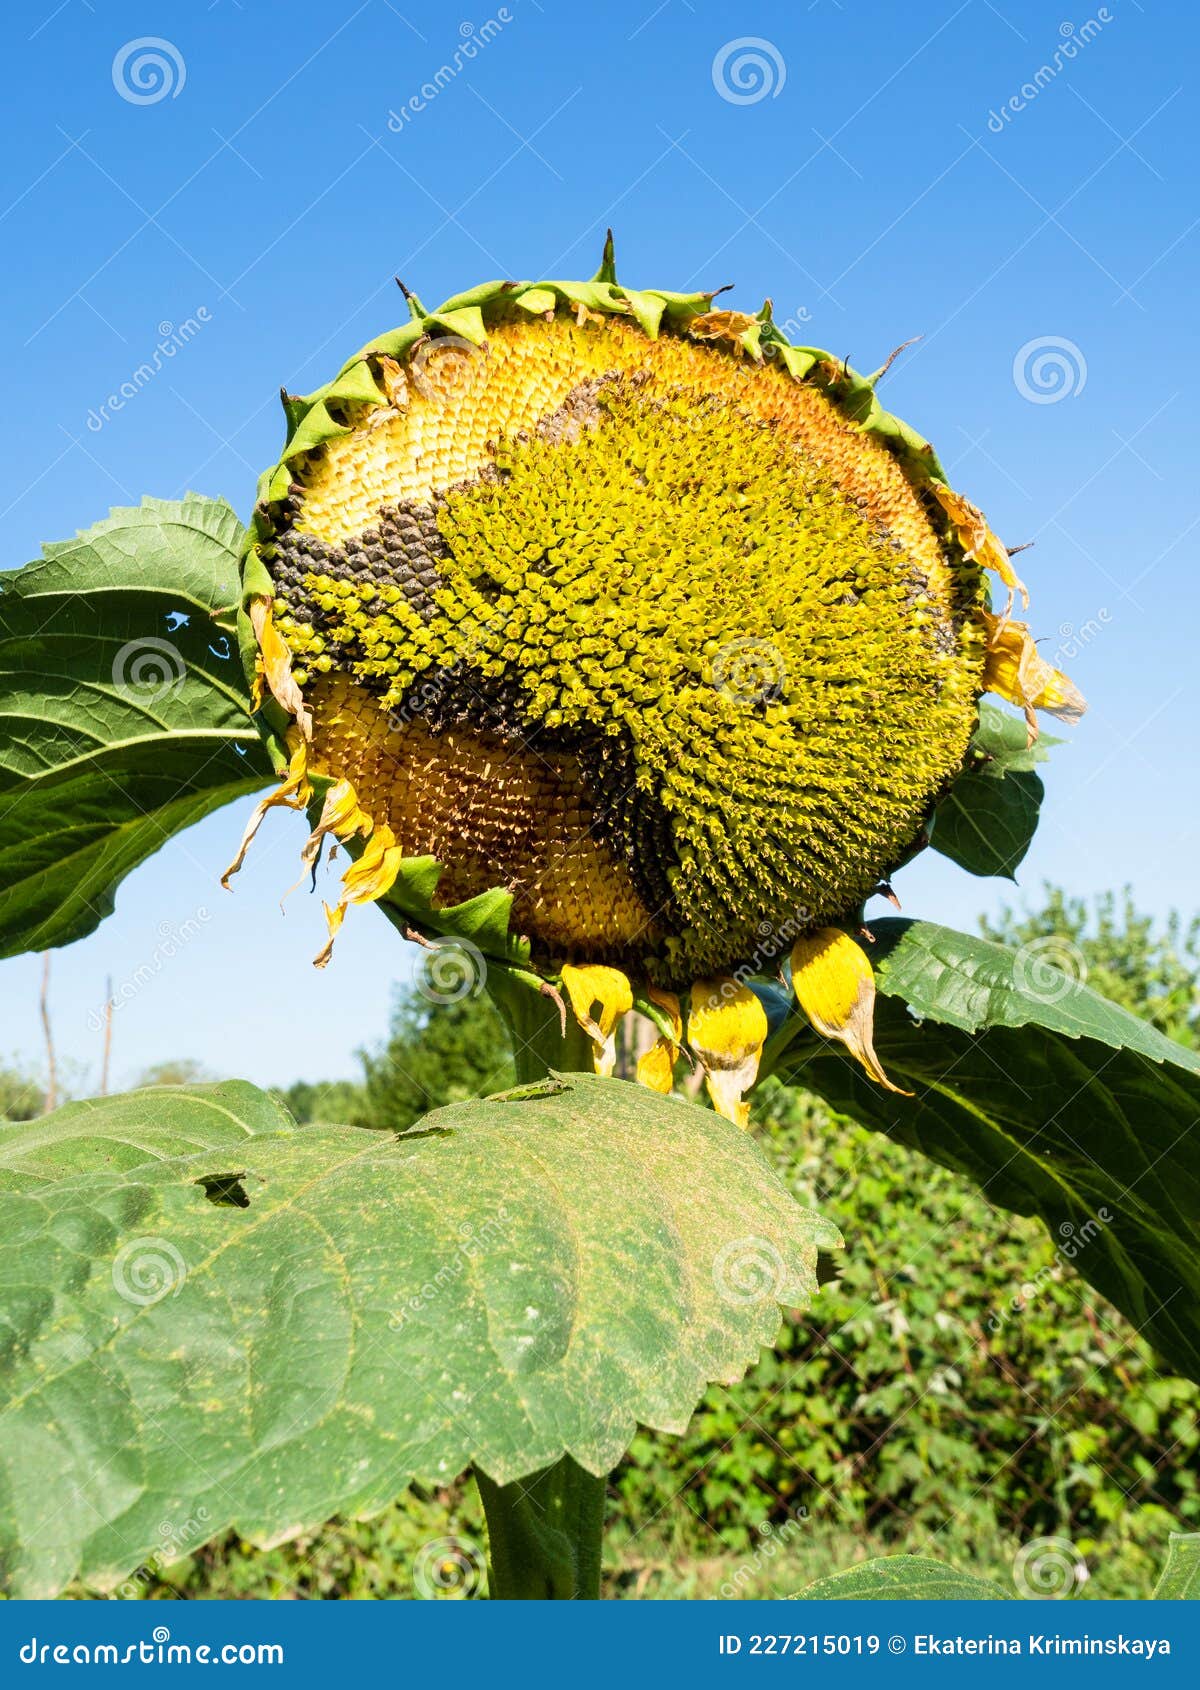 Sunflower Flower with Seeds Eaten by Birds Closeup Stock Image - Image ...